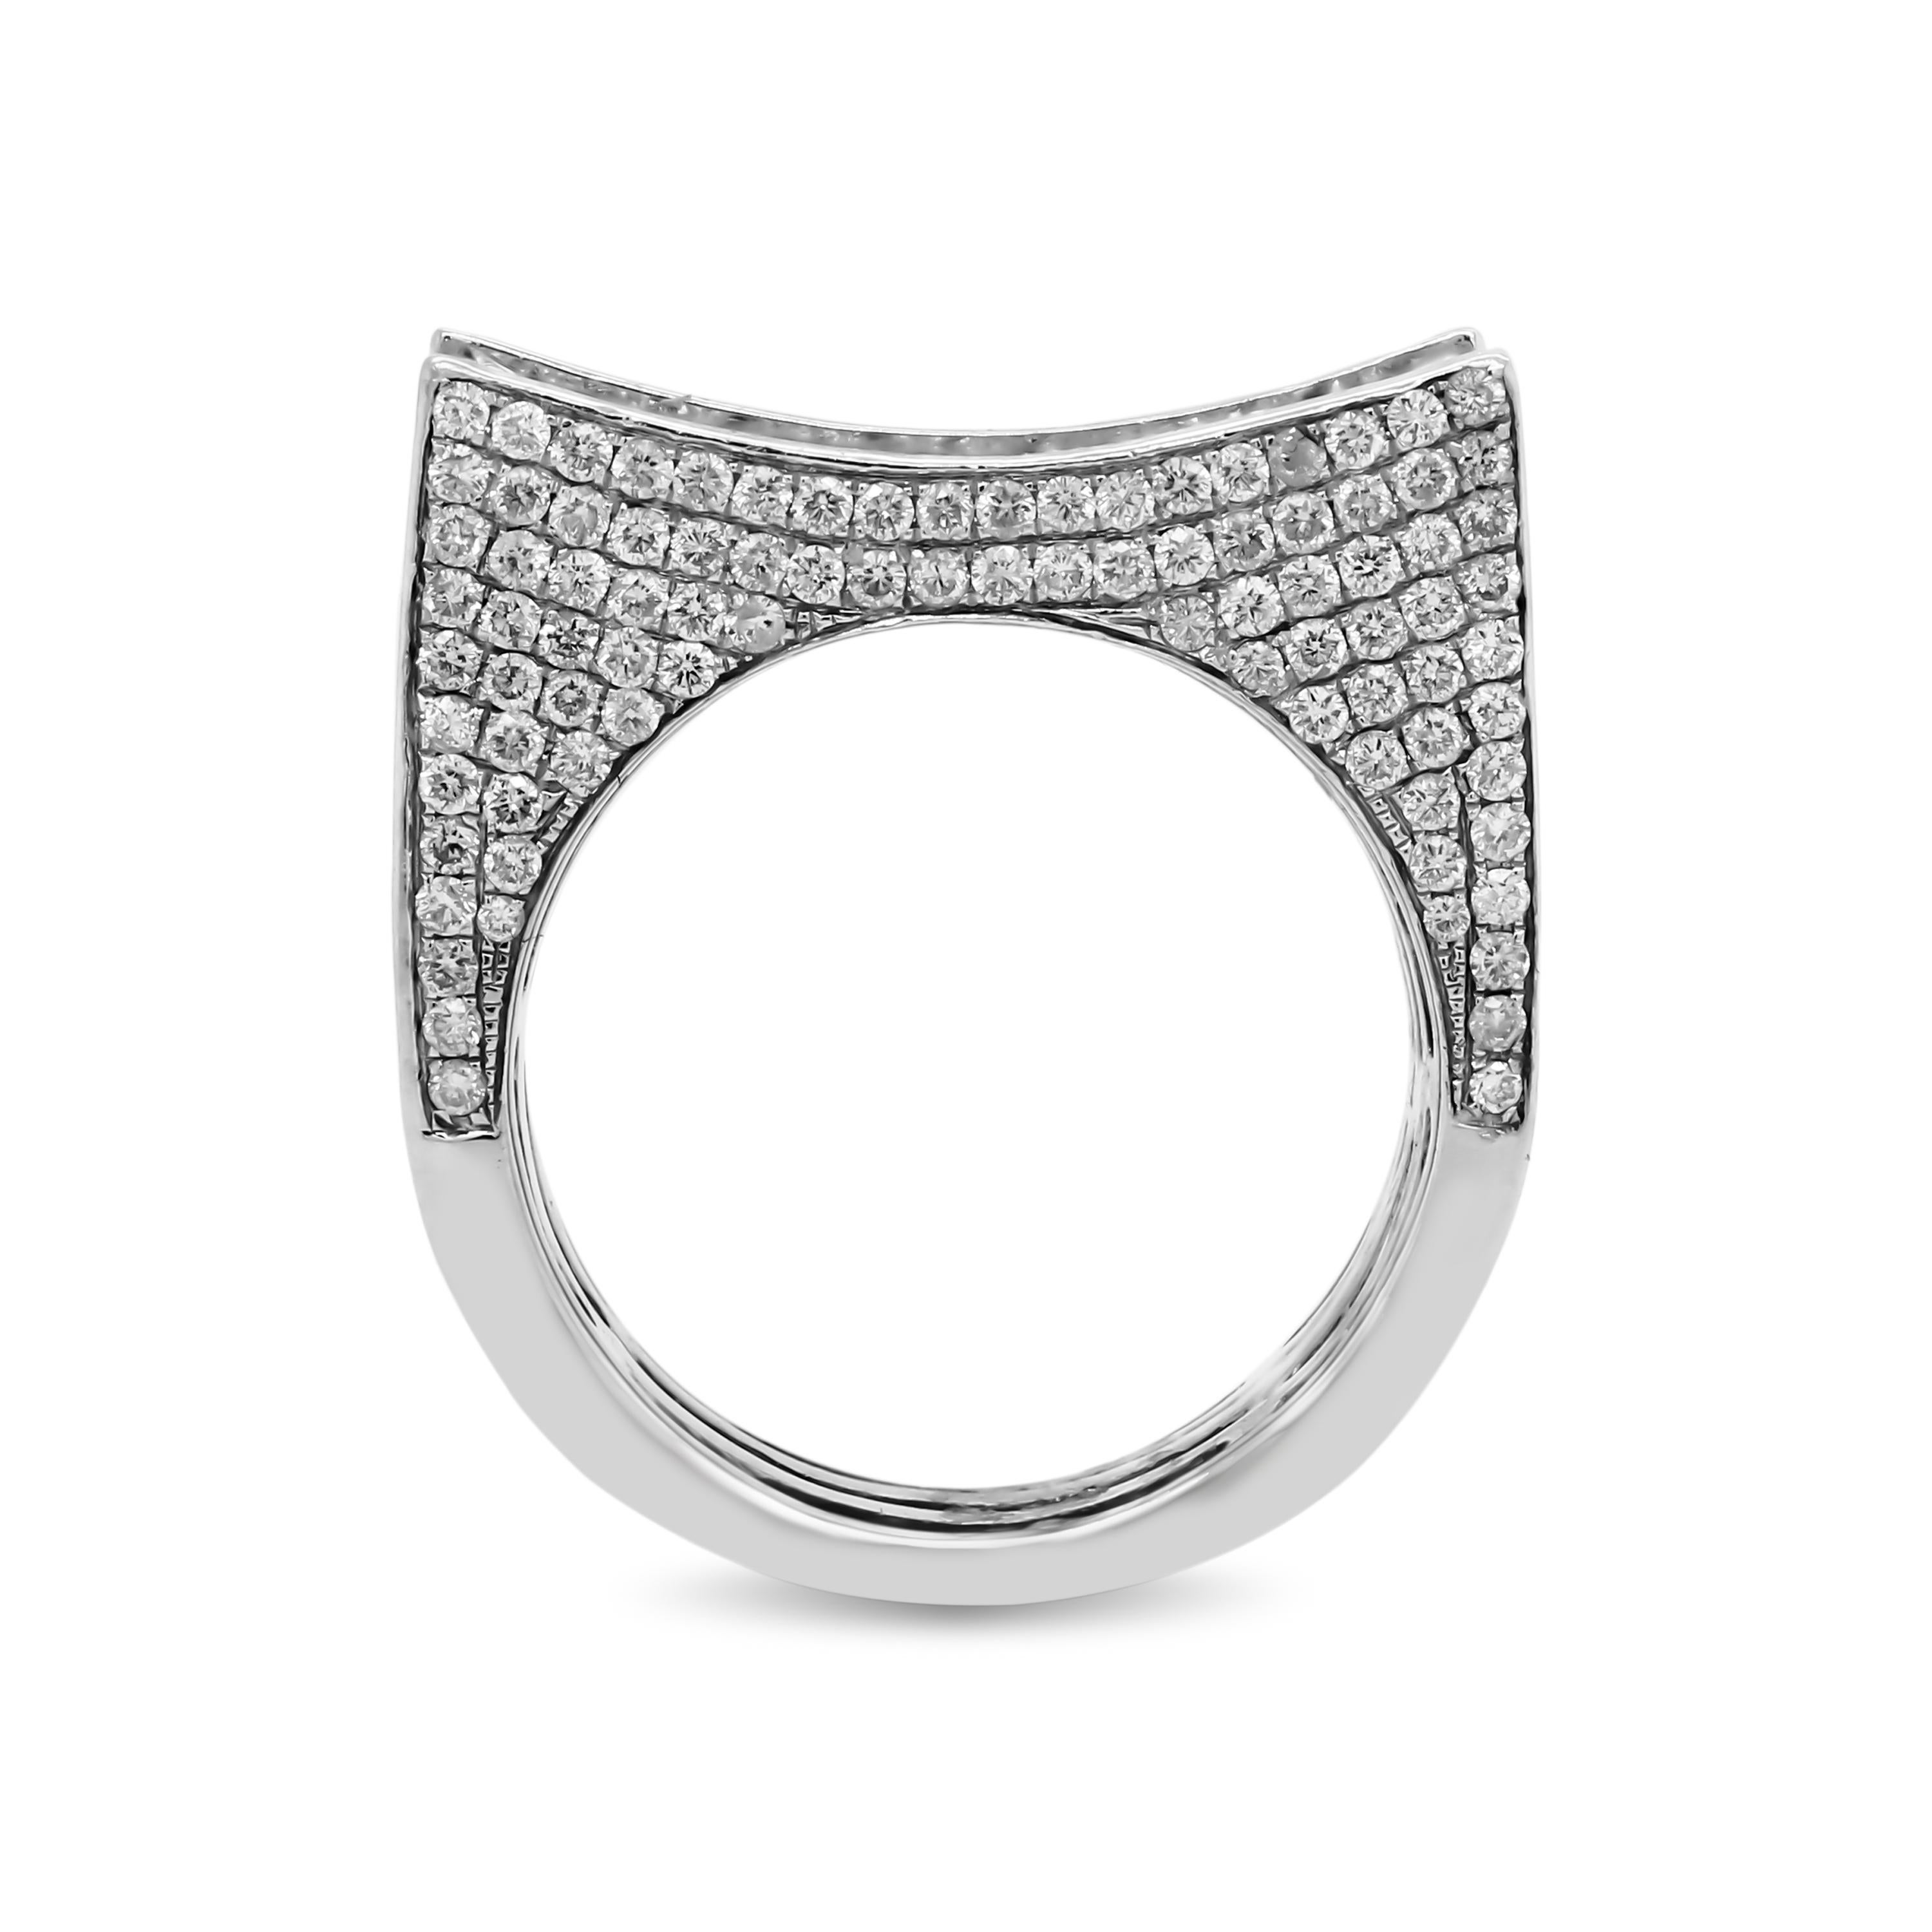 18K White Gold and Micro Pavé Set Diamond Mens Curved Dome Ring

This piece has diamonds set on all angles. The face of the ring has a curved like design with diamonds set all throughout as well as on the edges of the ring.

4.28 carat G color, VS